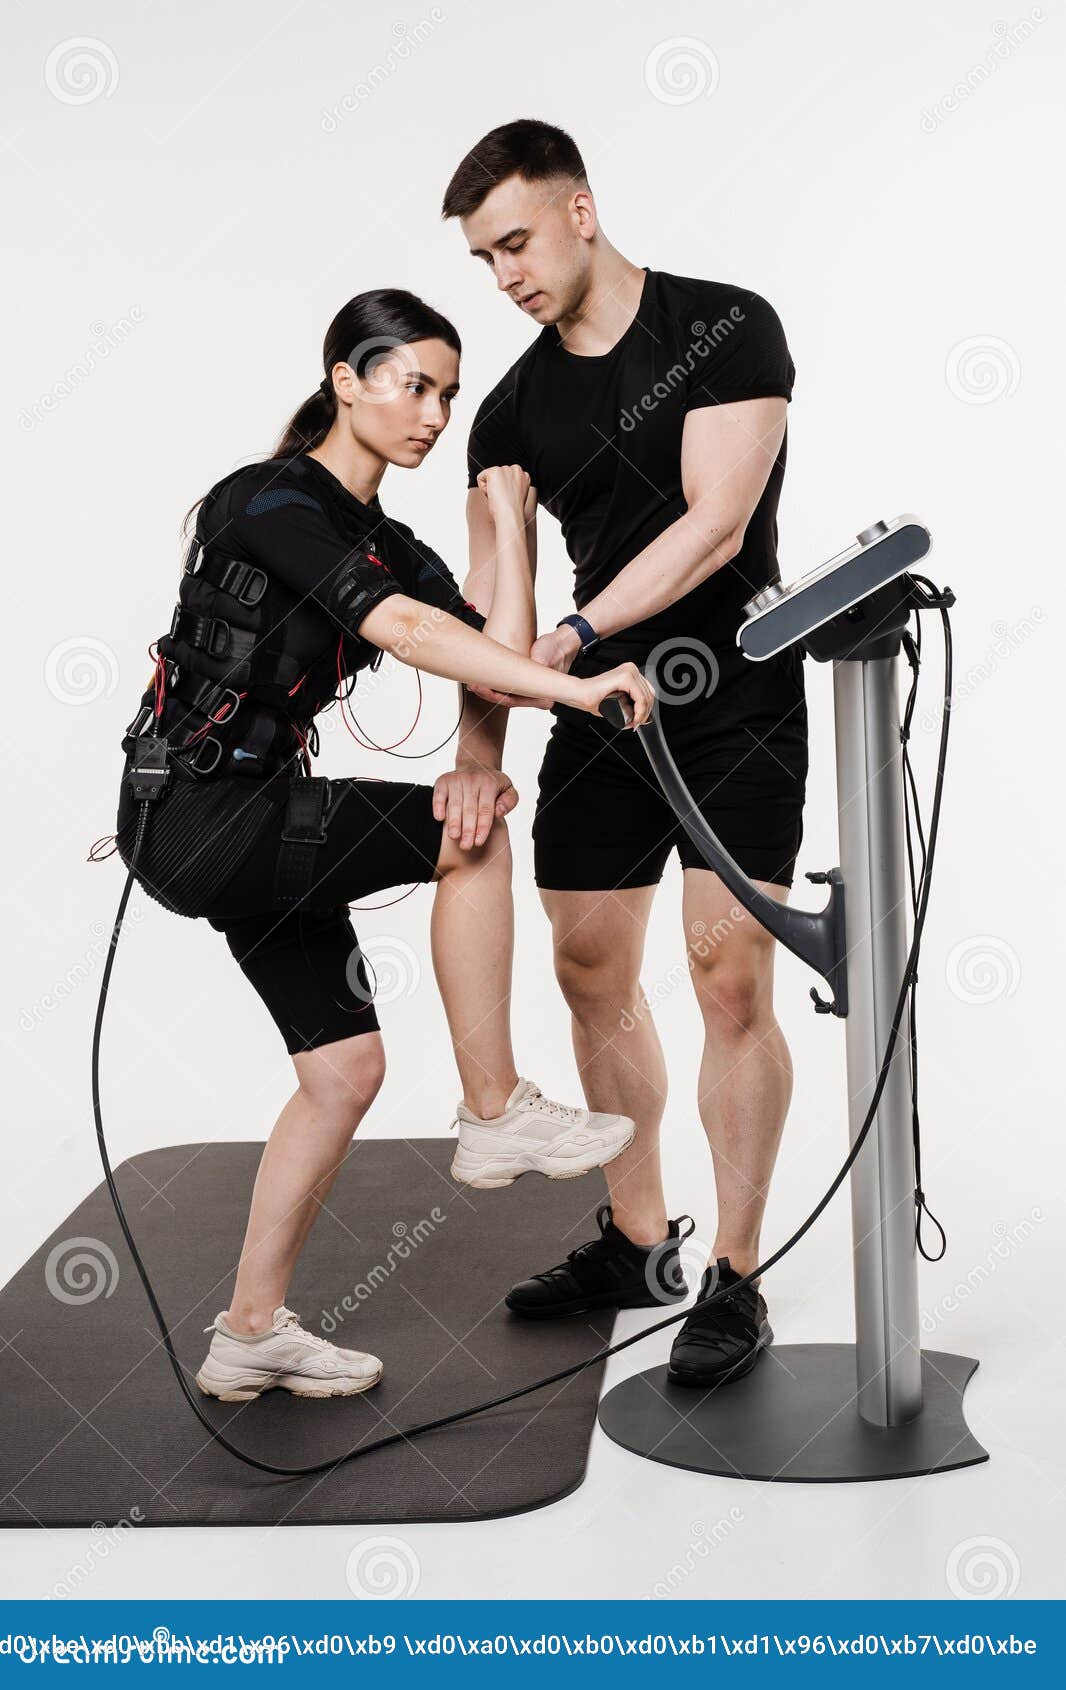 https://thumbs.dreamstime.com/z/ems-sport-training-electrical-muscle-stimulation-suit-man-girl-uses-impulses-to-stimulate-muscles-white-background-275564395.jpg